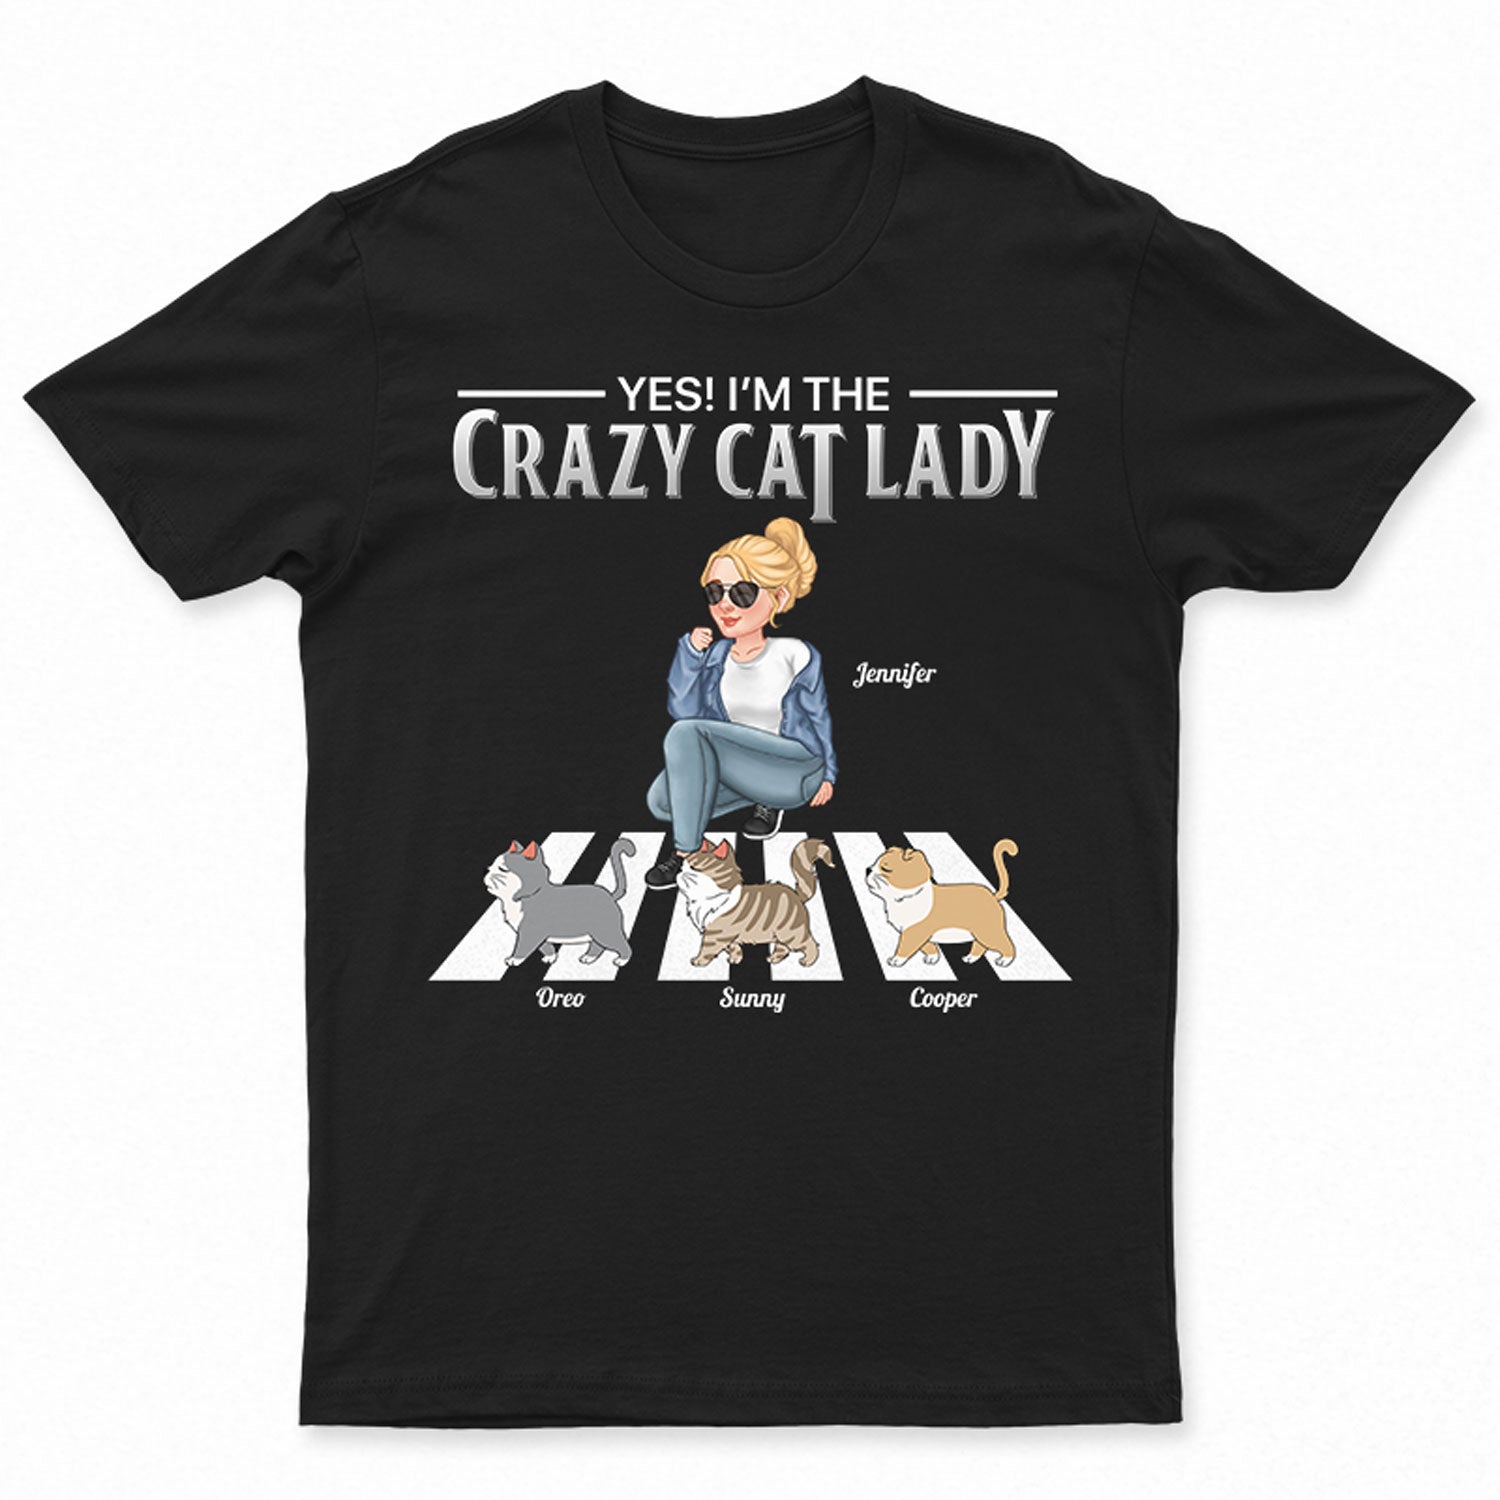 Yes I'm The Crazy Cat Lady - Gift For Cat Mom, Cat Lover, Mother - Personalized T Shirt